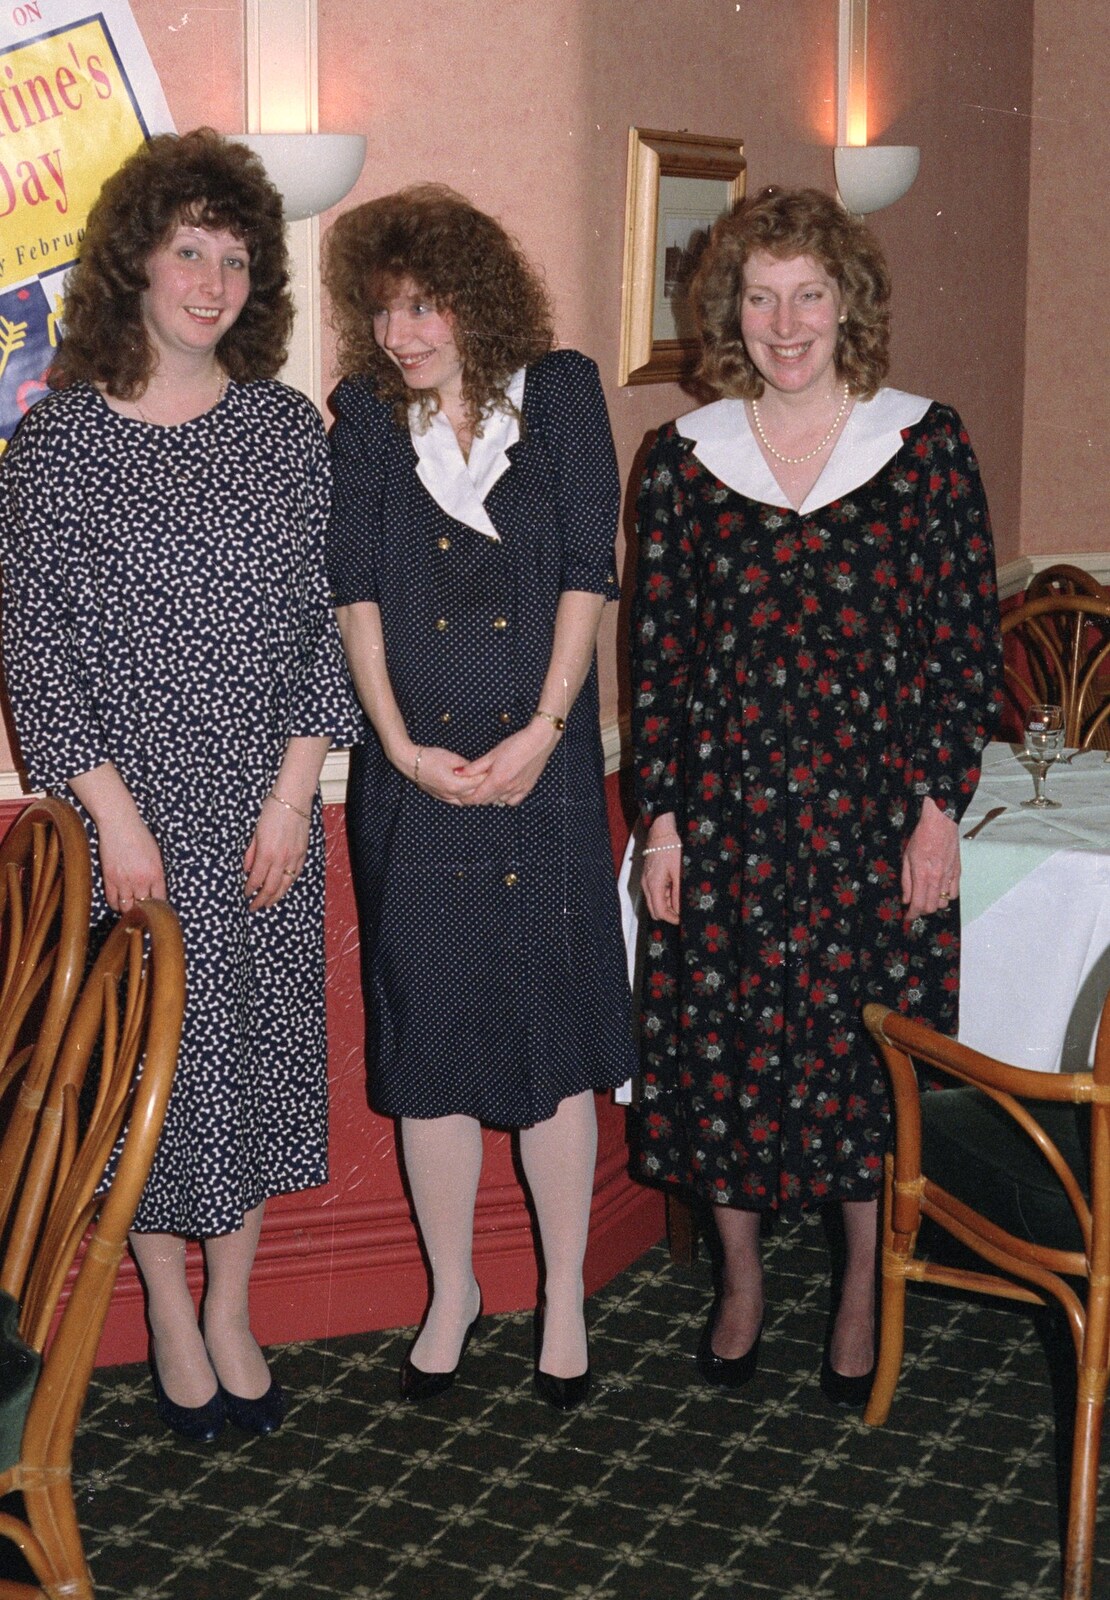 Alison, Monique and Jackie from Printec at the Park Hotel, Diss, Norfolk - 14th January 1992